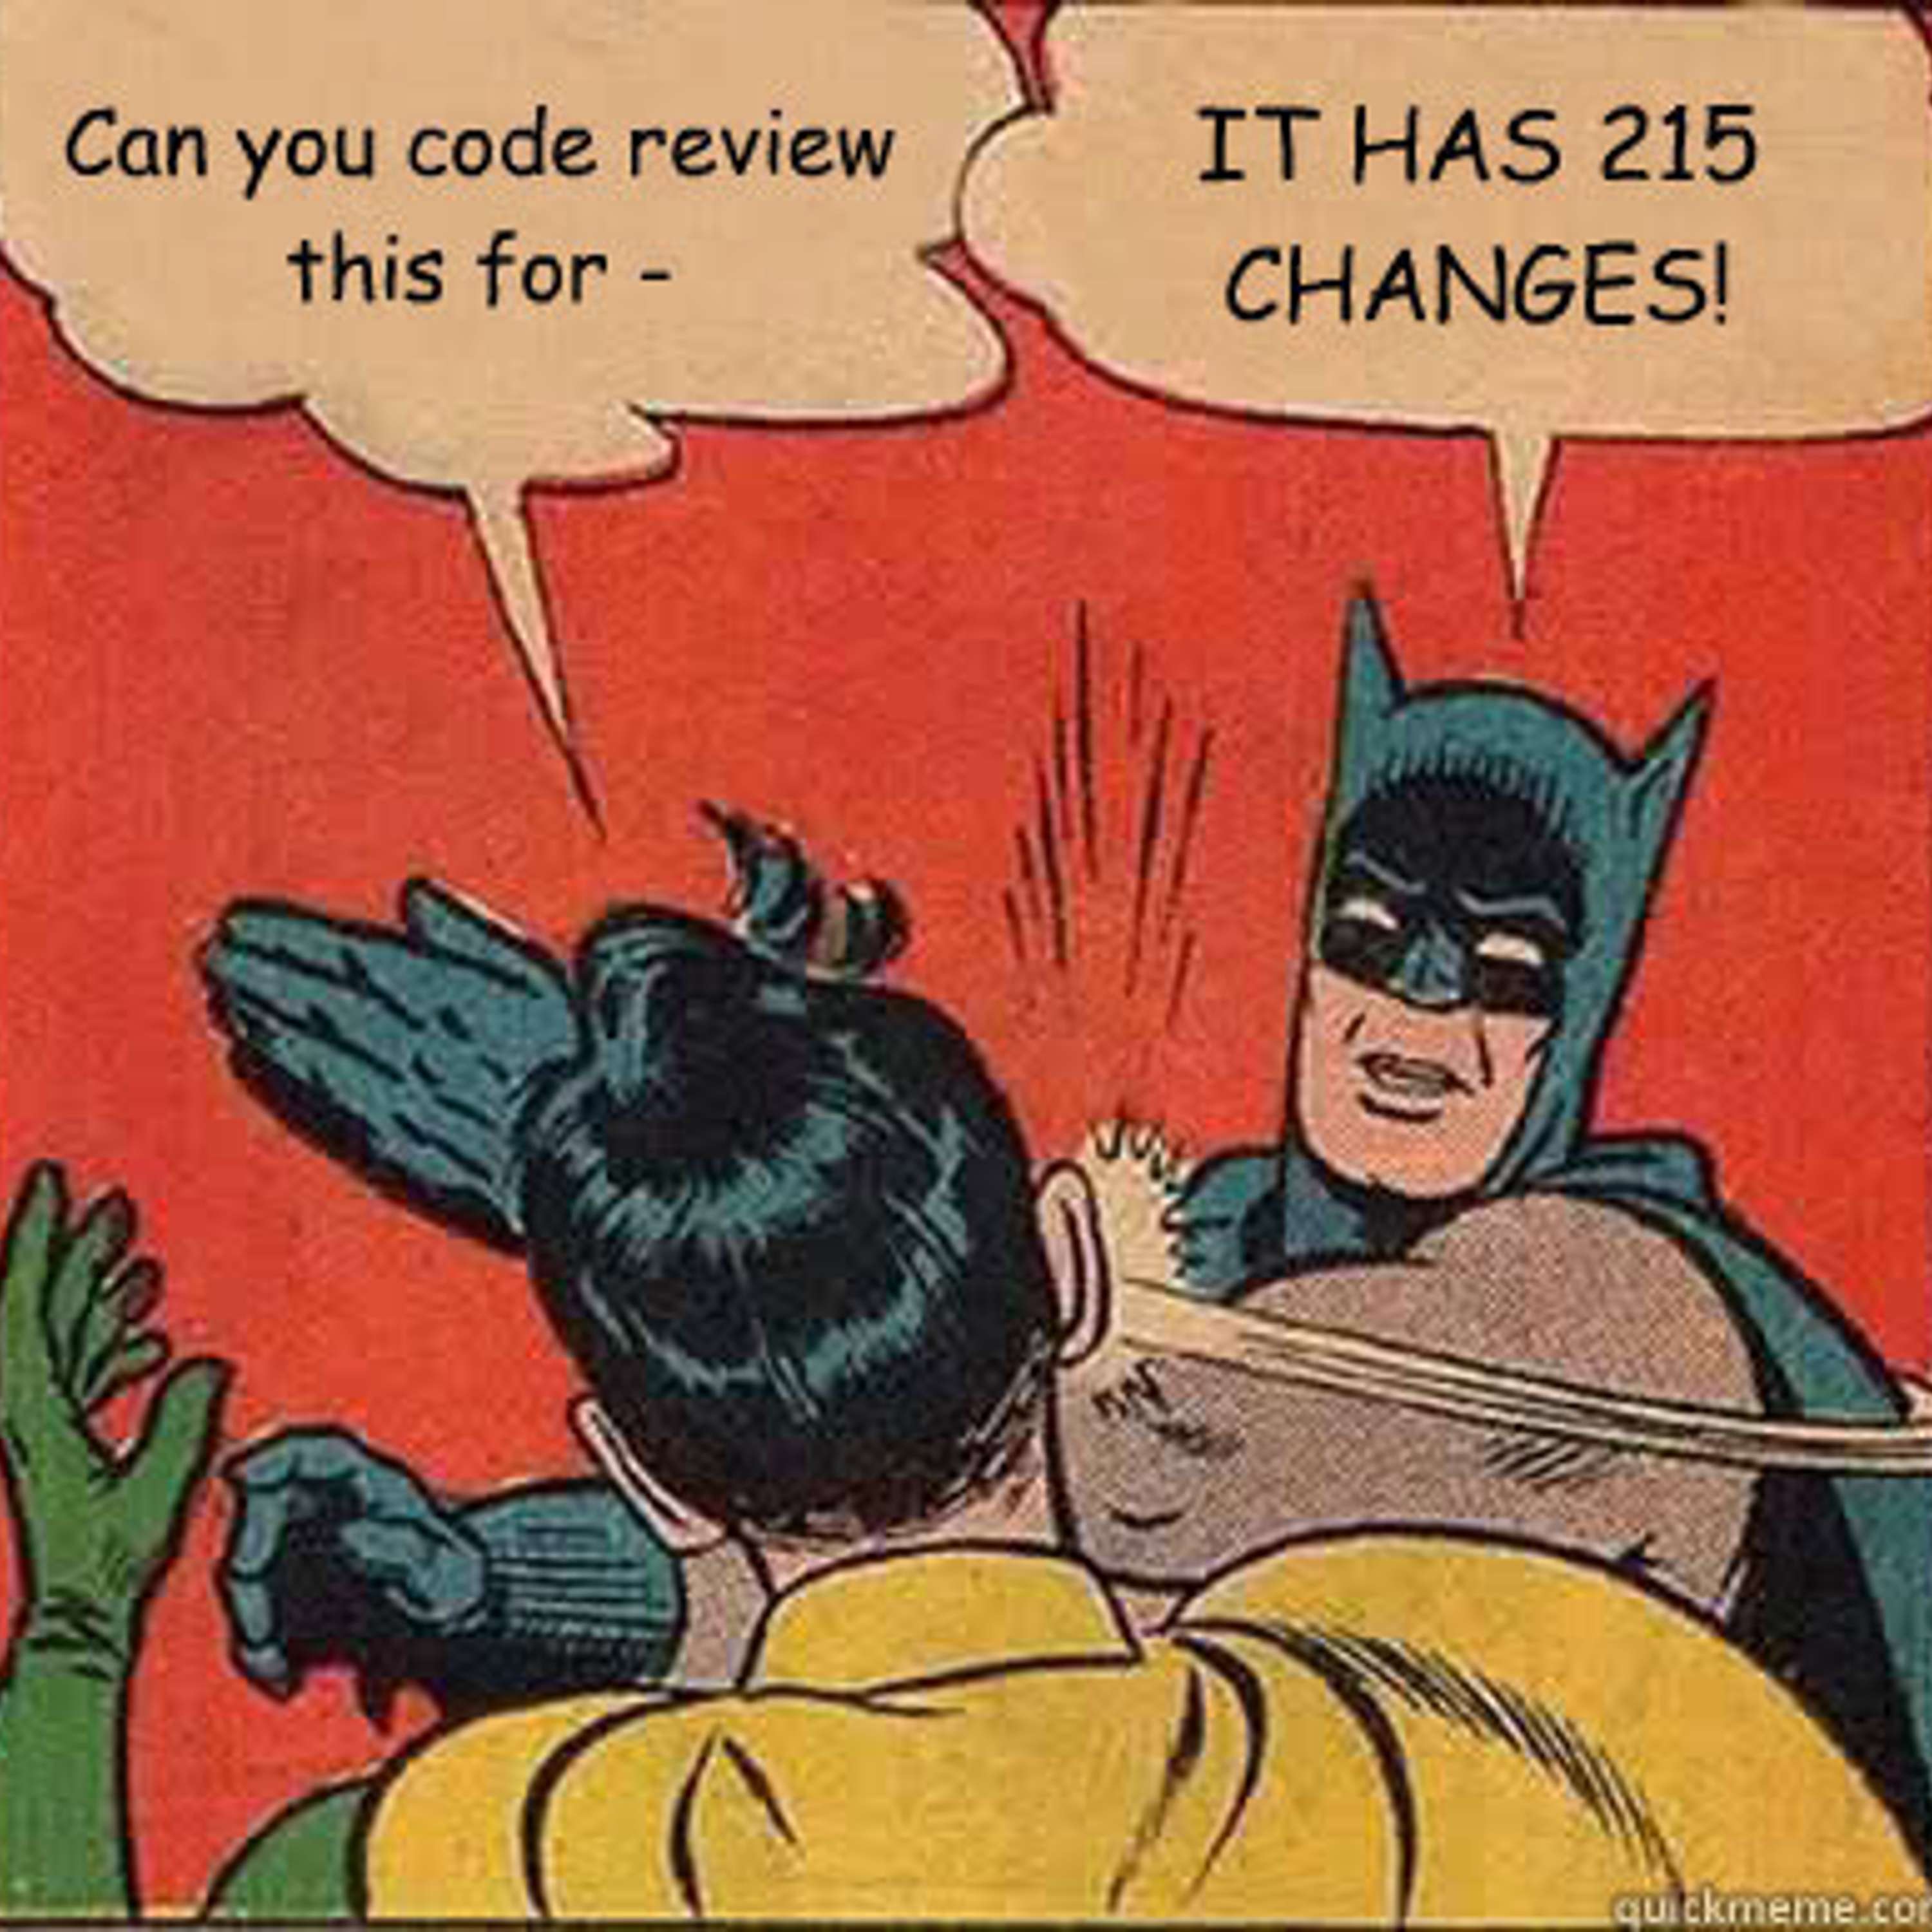 150: Code Reviews with On Freund